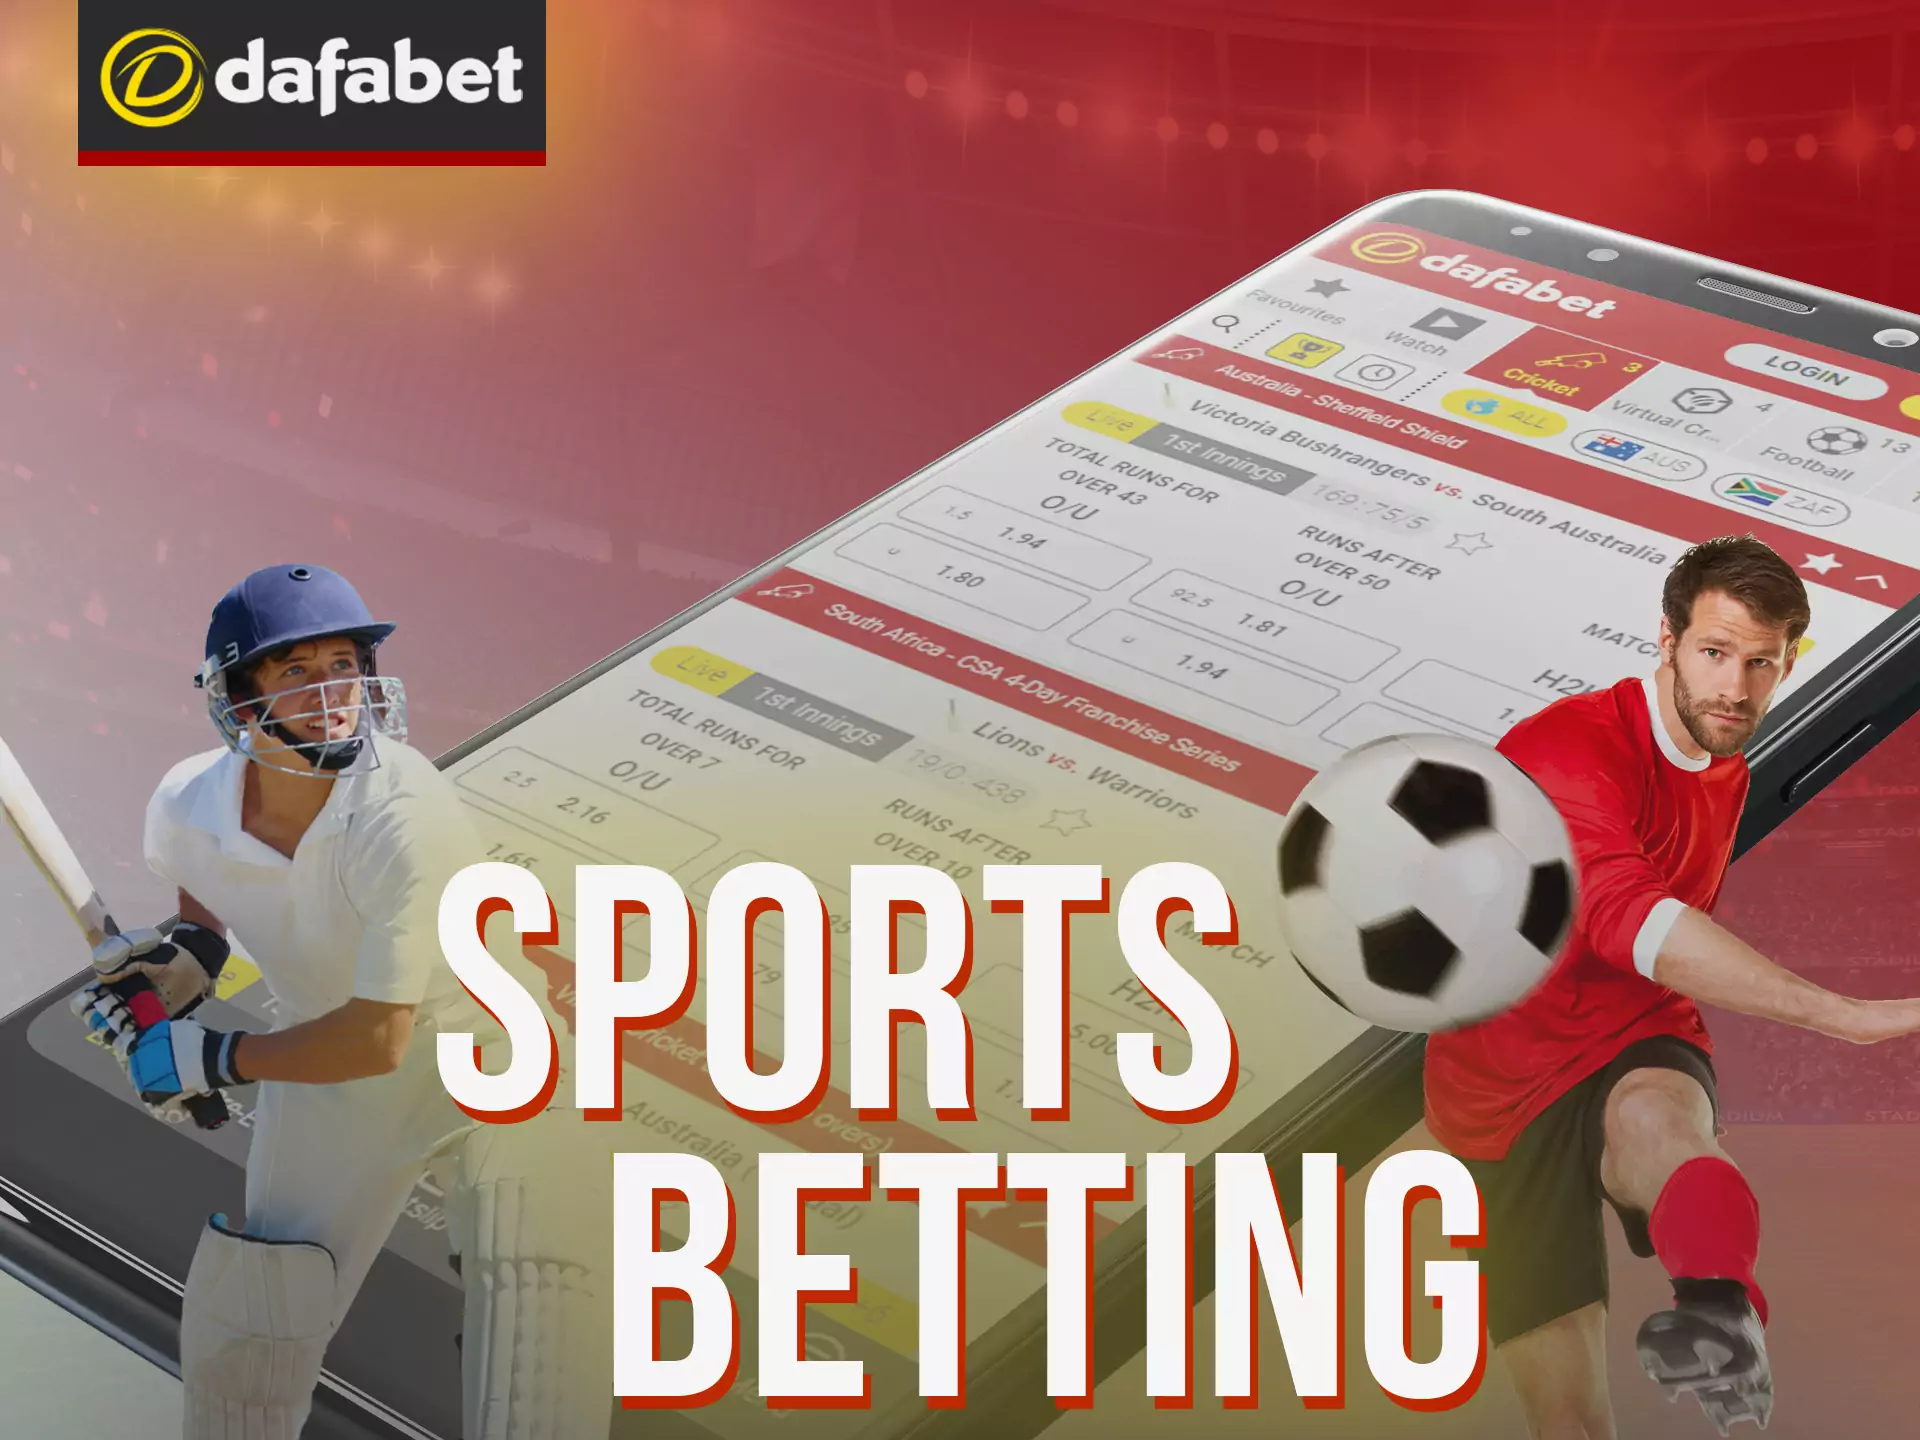 Bet on your favourite sports in Dafabet app.